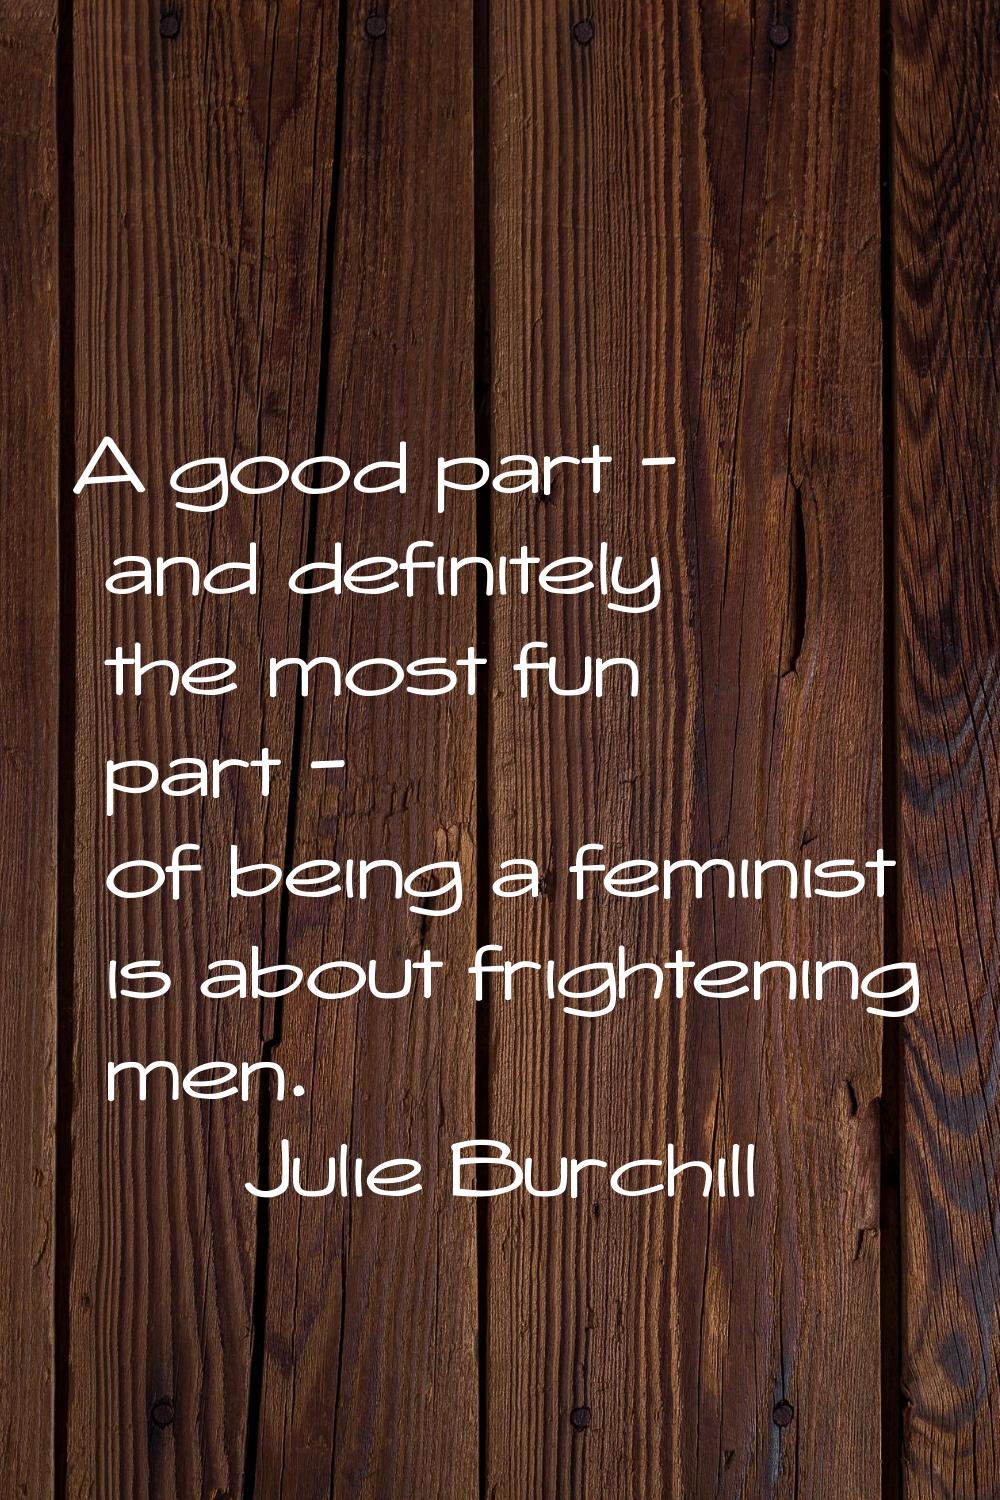 A good part - and definitely the most fun part - of being a feminist is about frightening men.